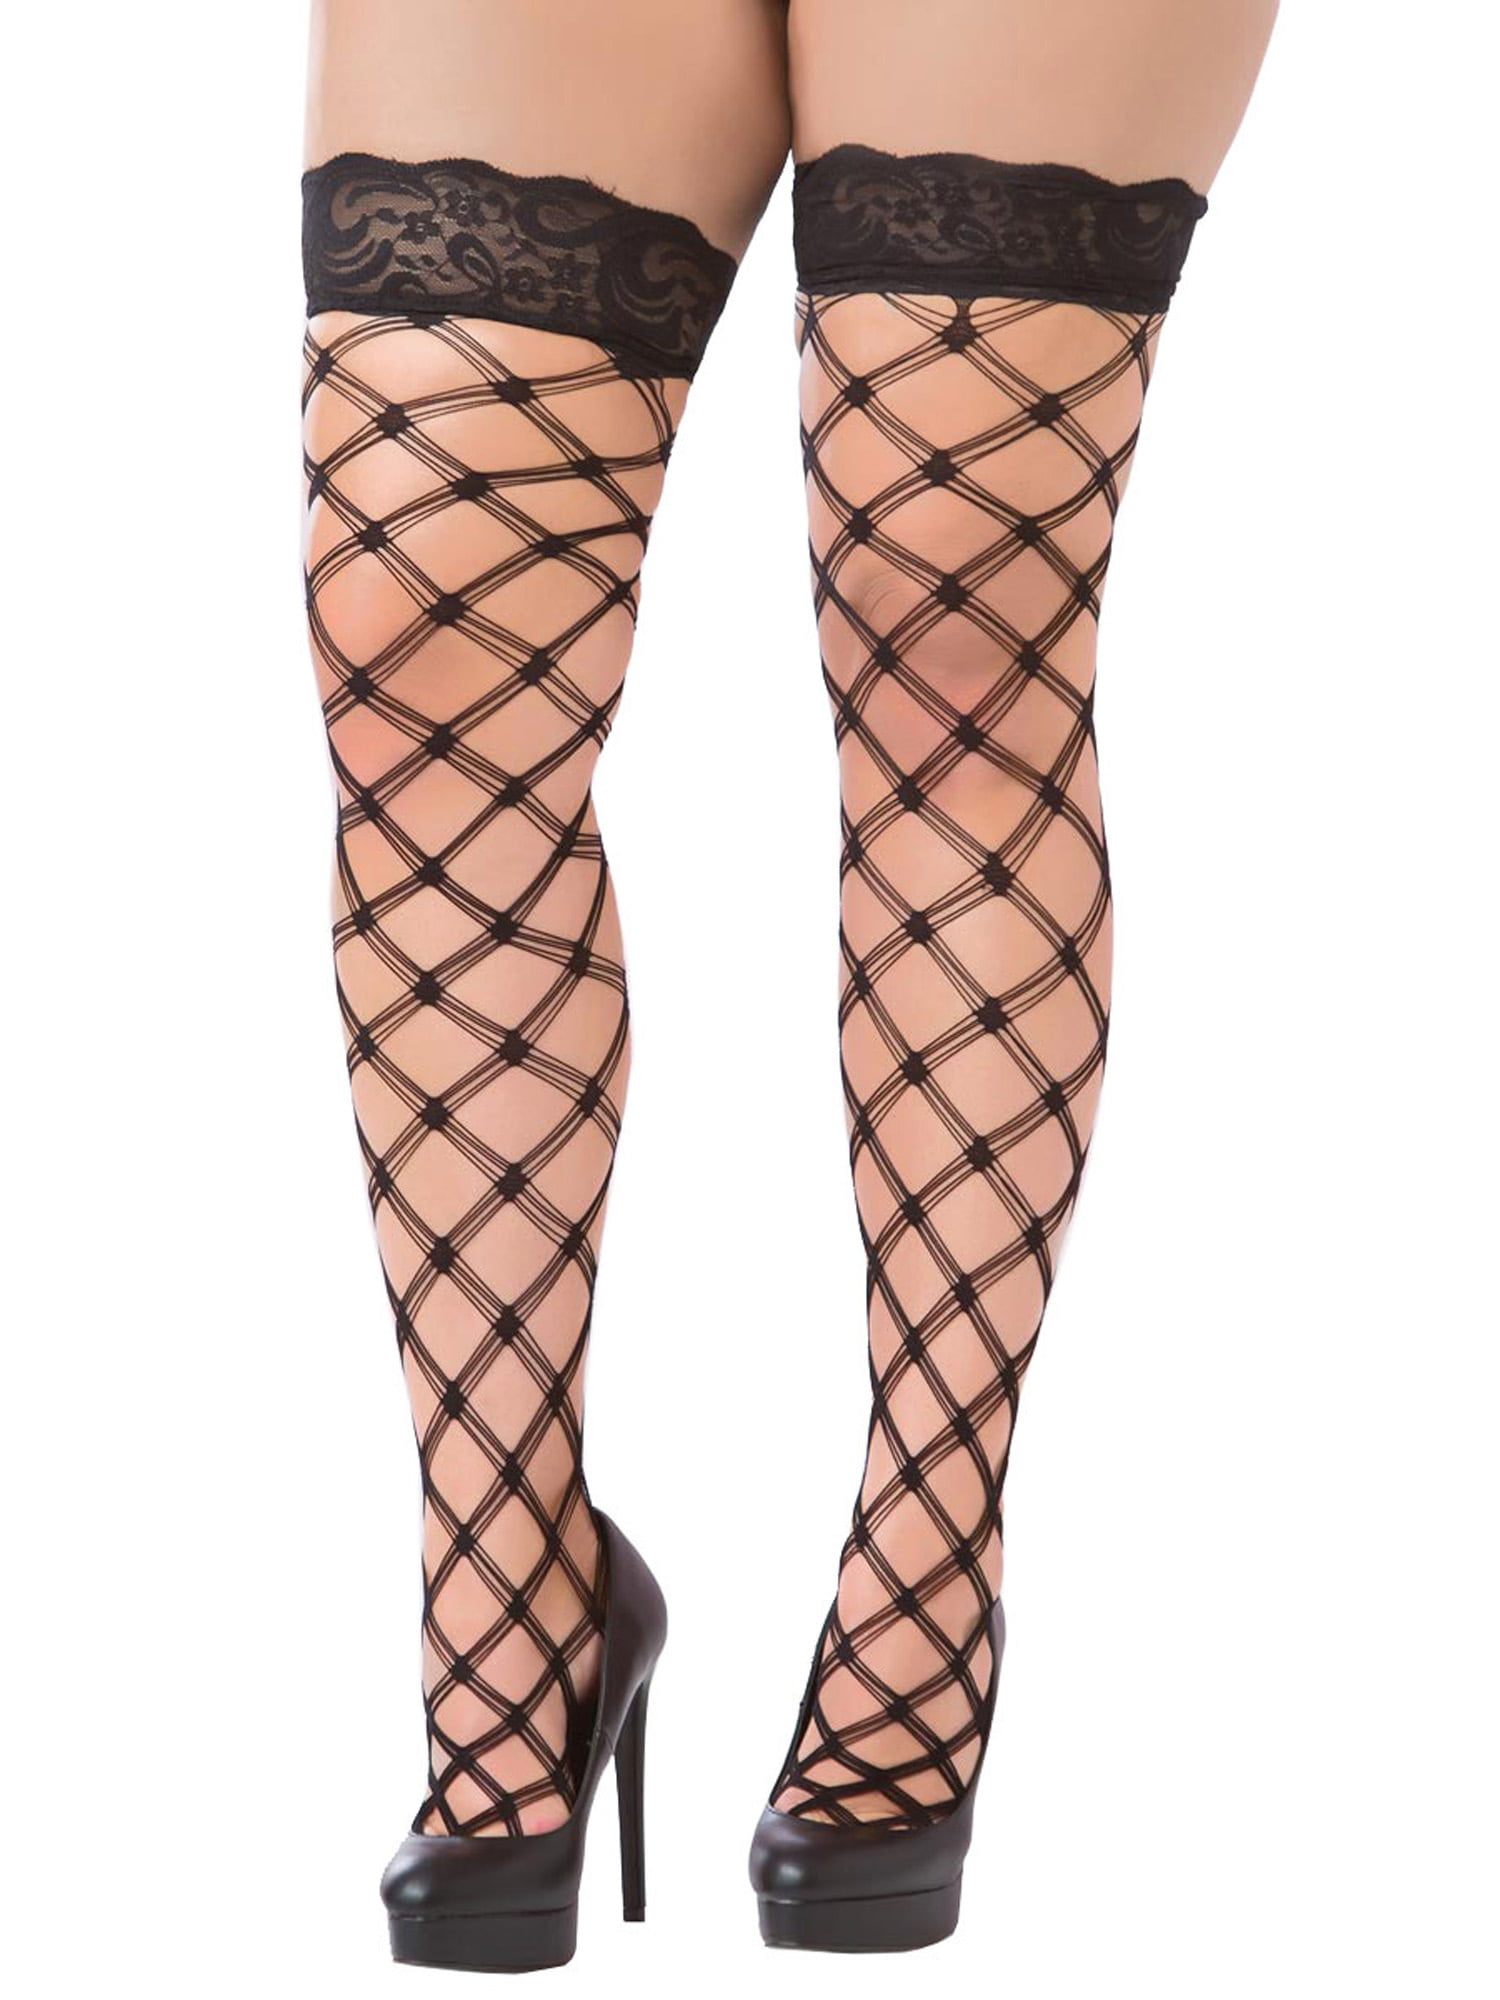 Red fishnetfence net thigh high stockings OS